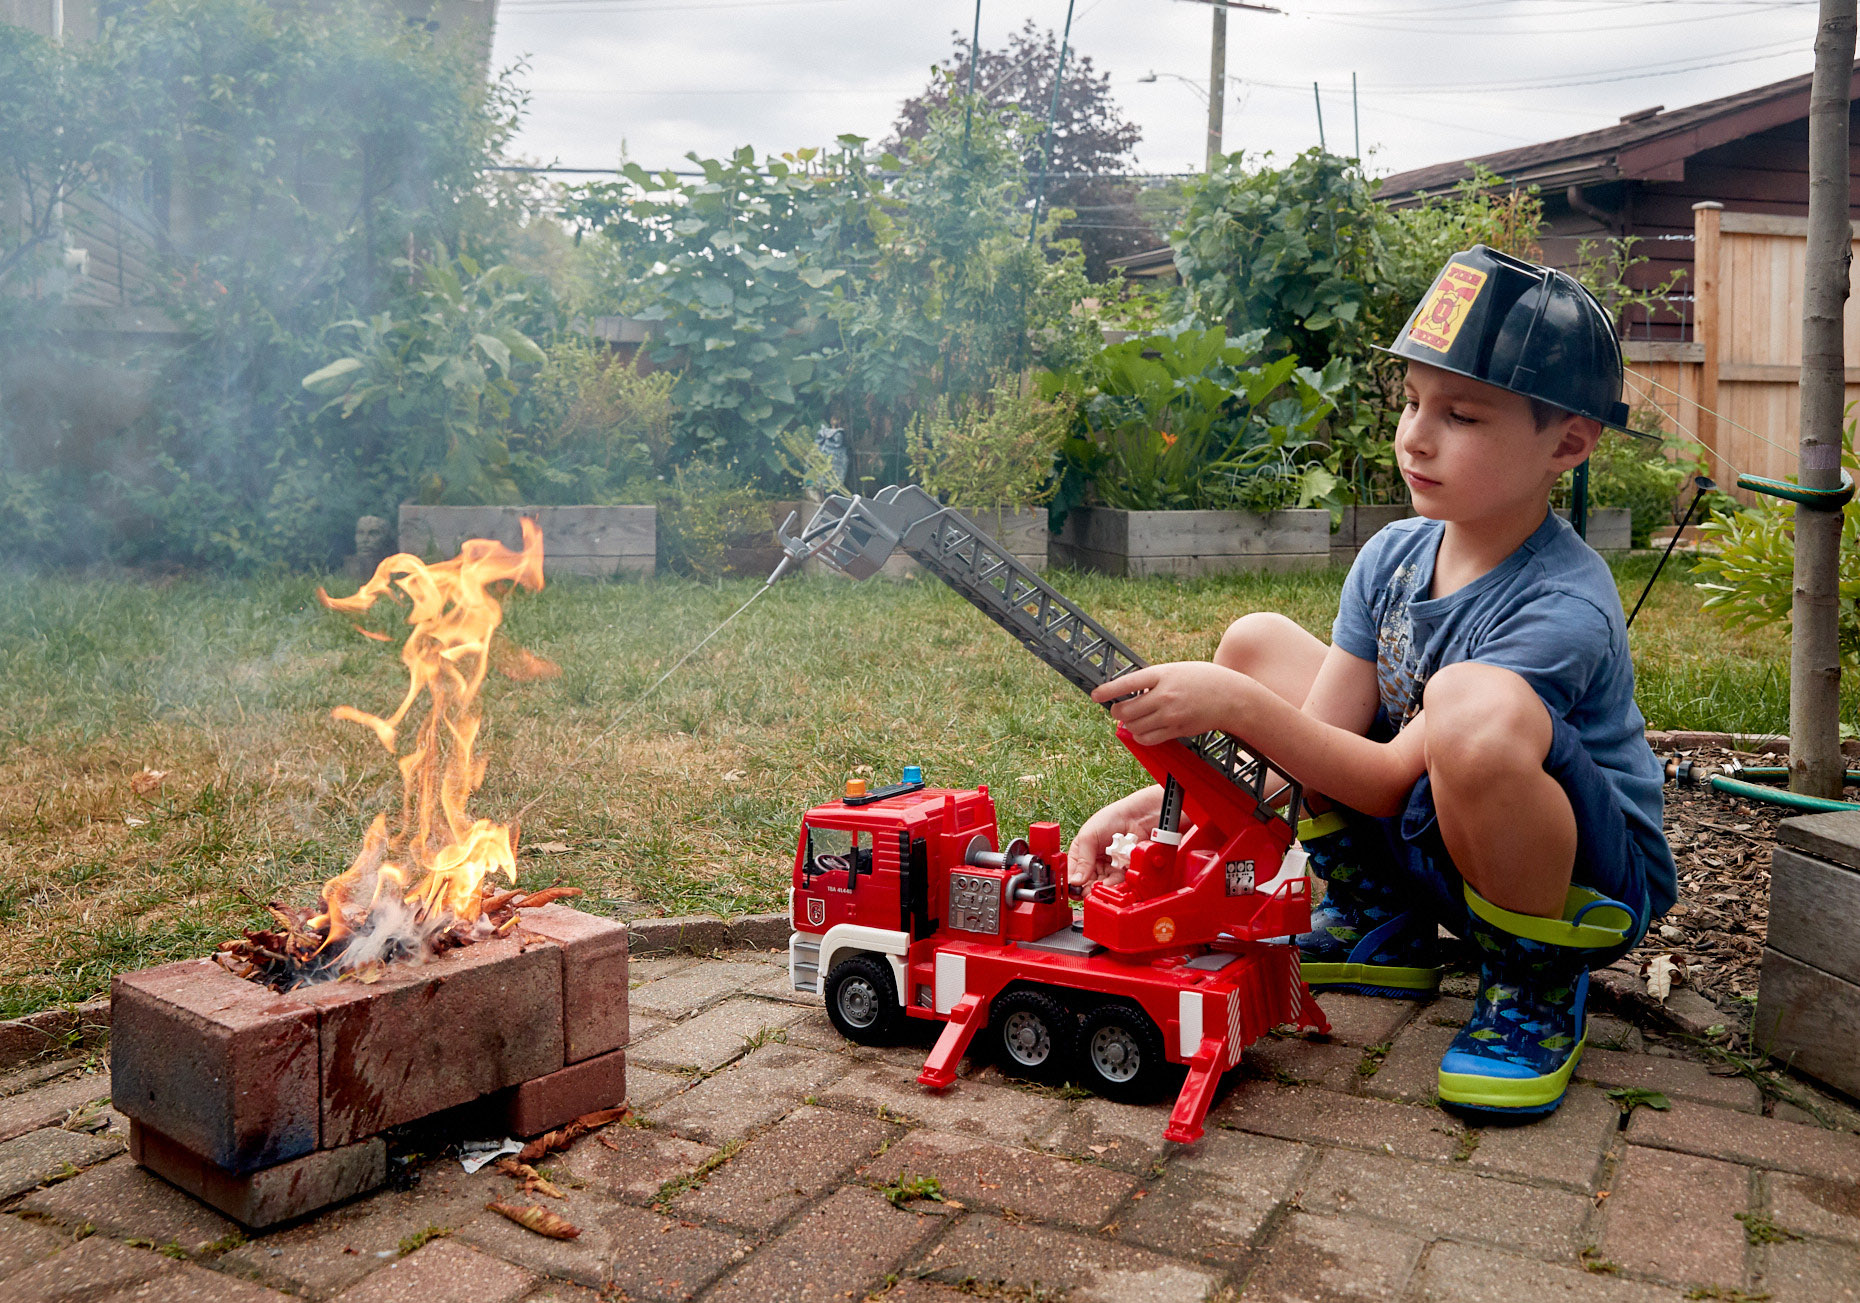 Boy playing fireman with real fire | Childrens photography by Saverio Truglia